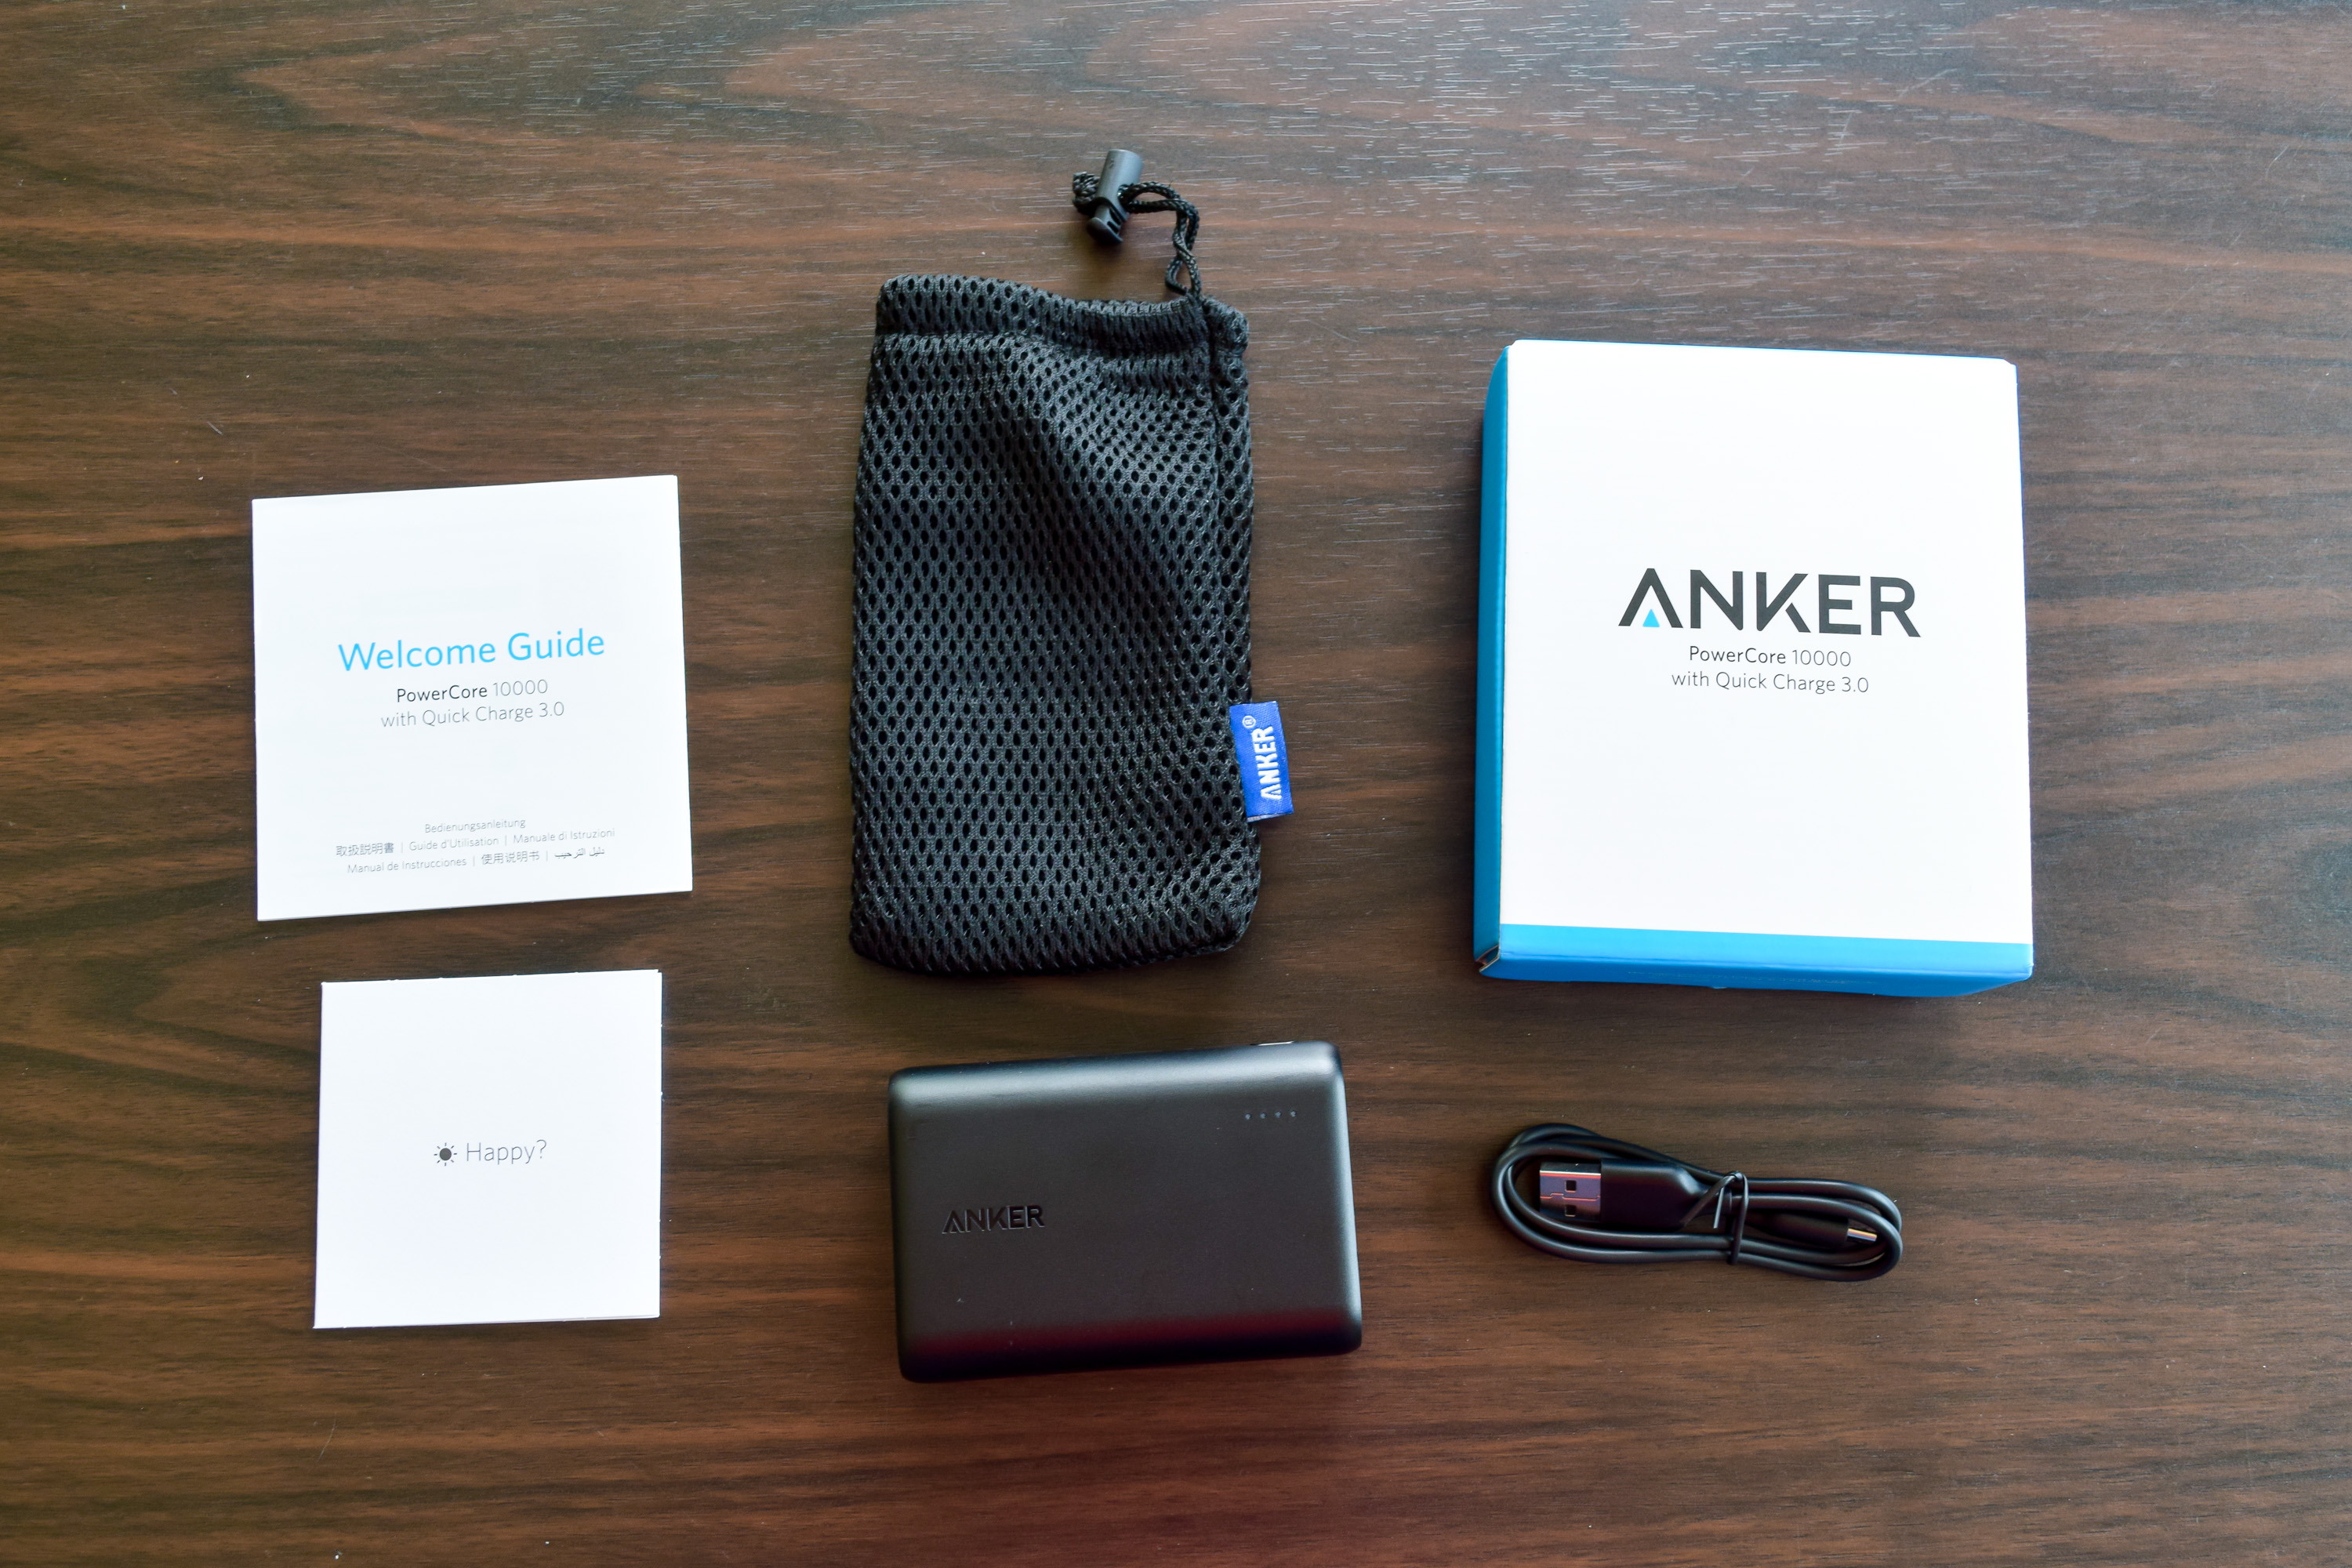 Anker PowerCore 10000 with Quick Charge 3.0 â€